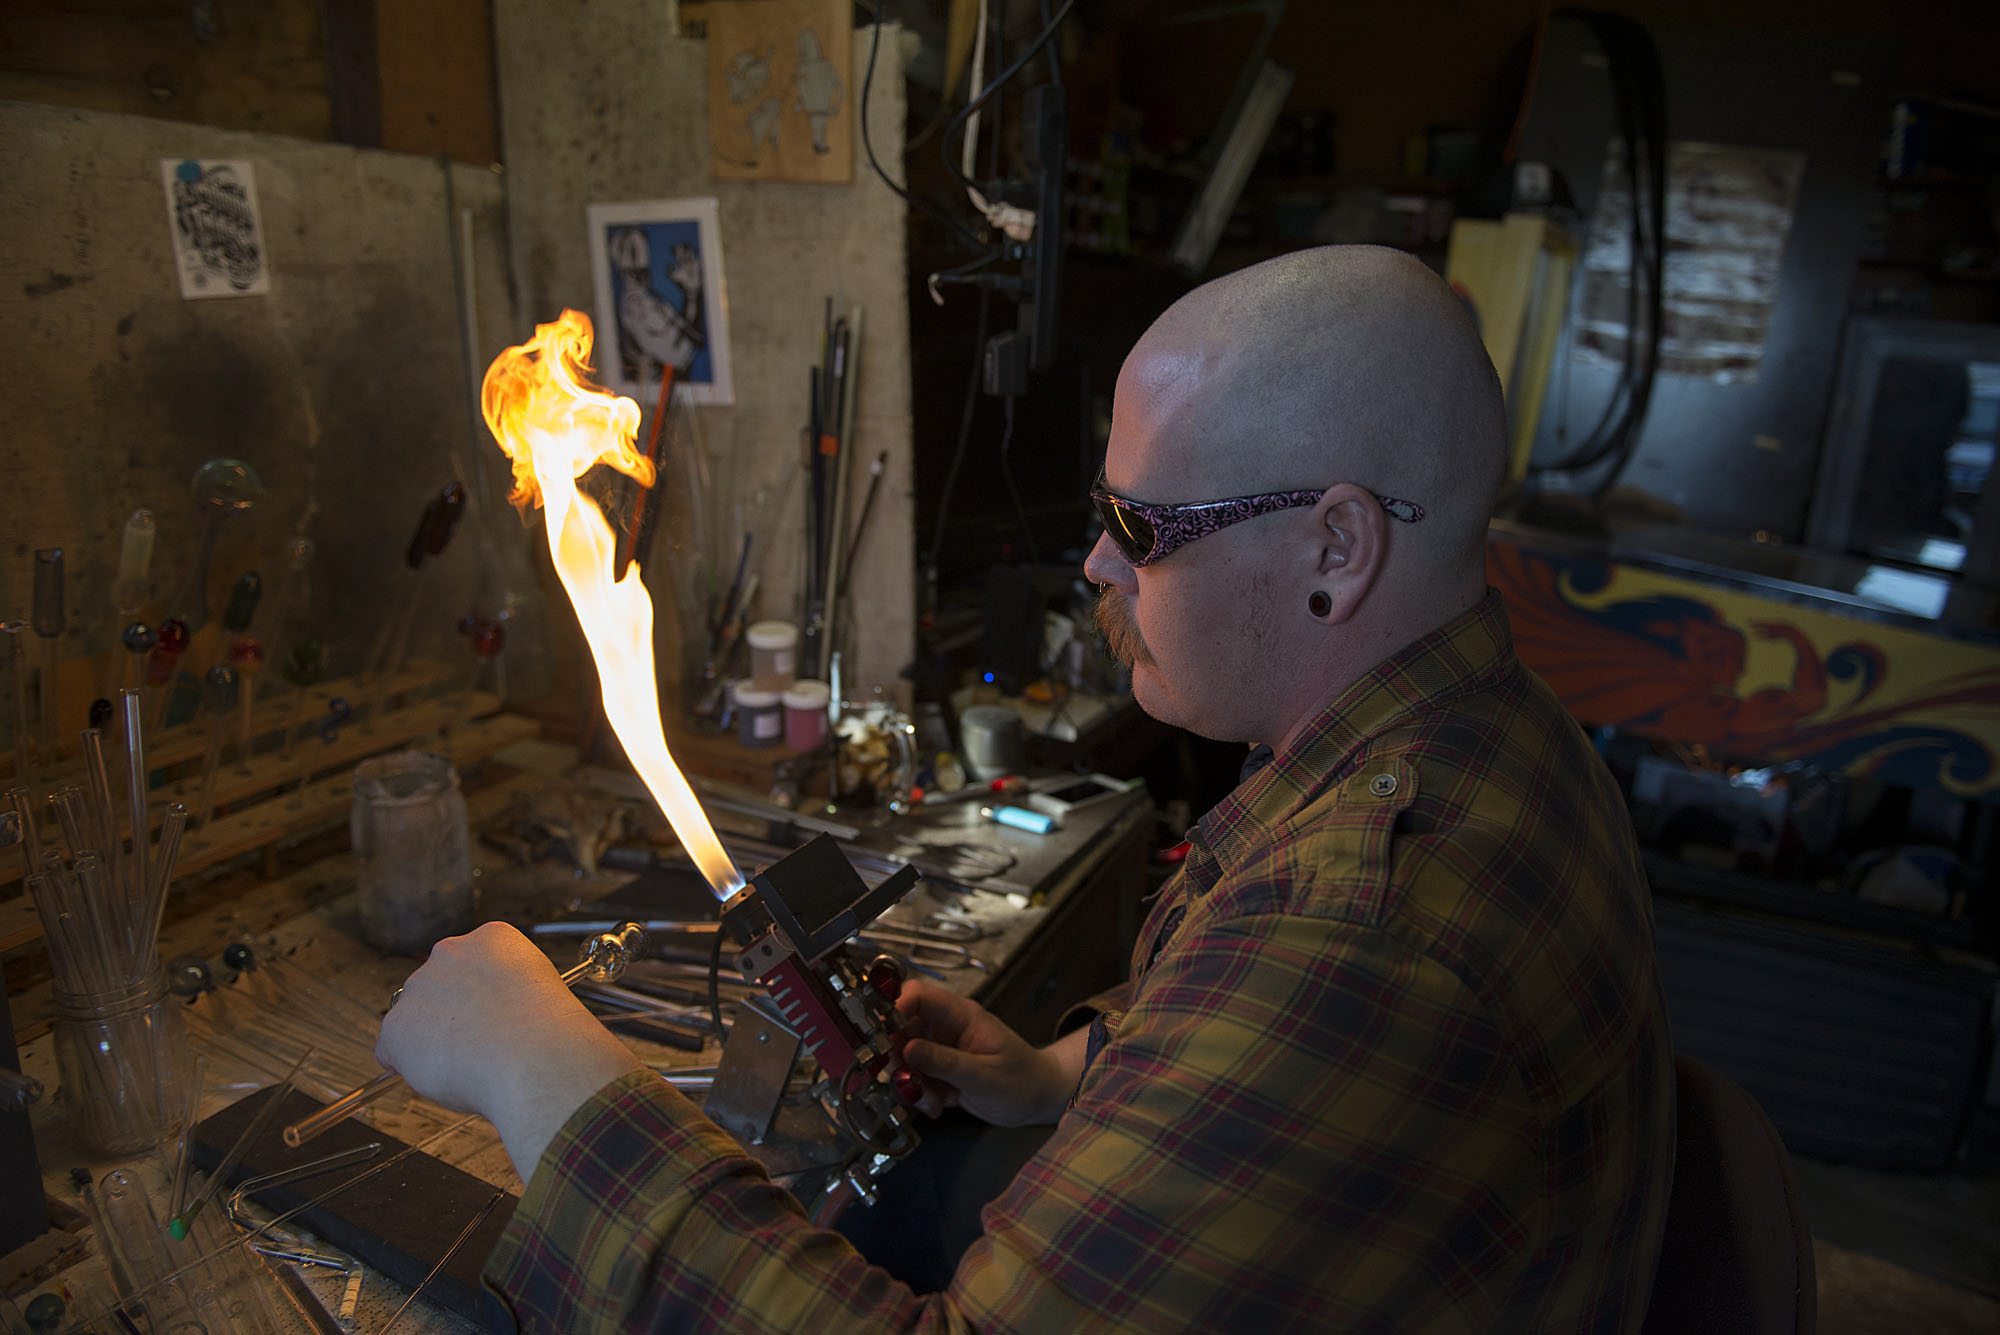 Jamie Jenkins of Brush Prairie uses a torch to manipulate glass while making a pipe.